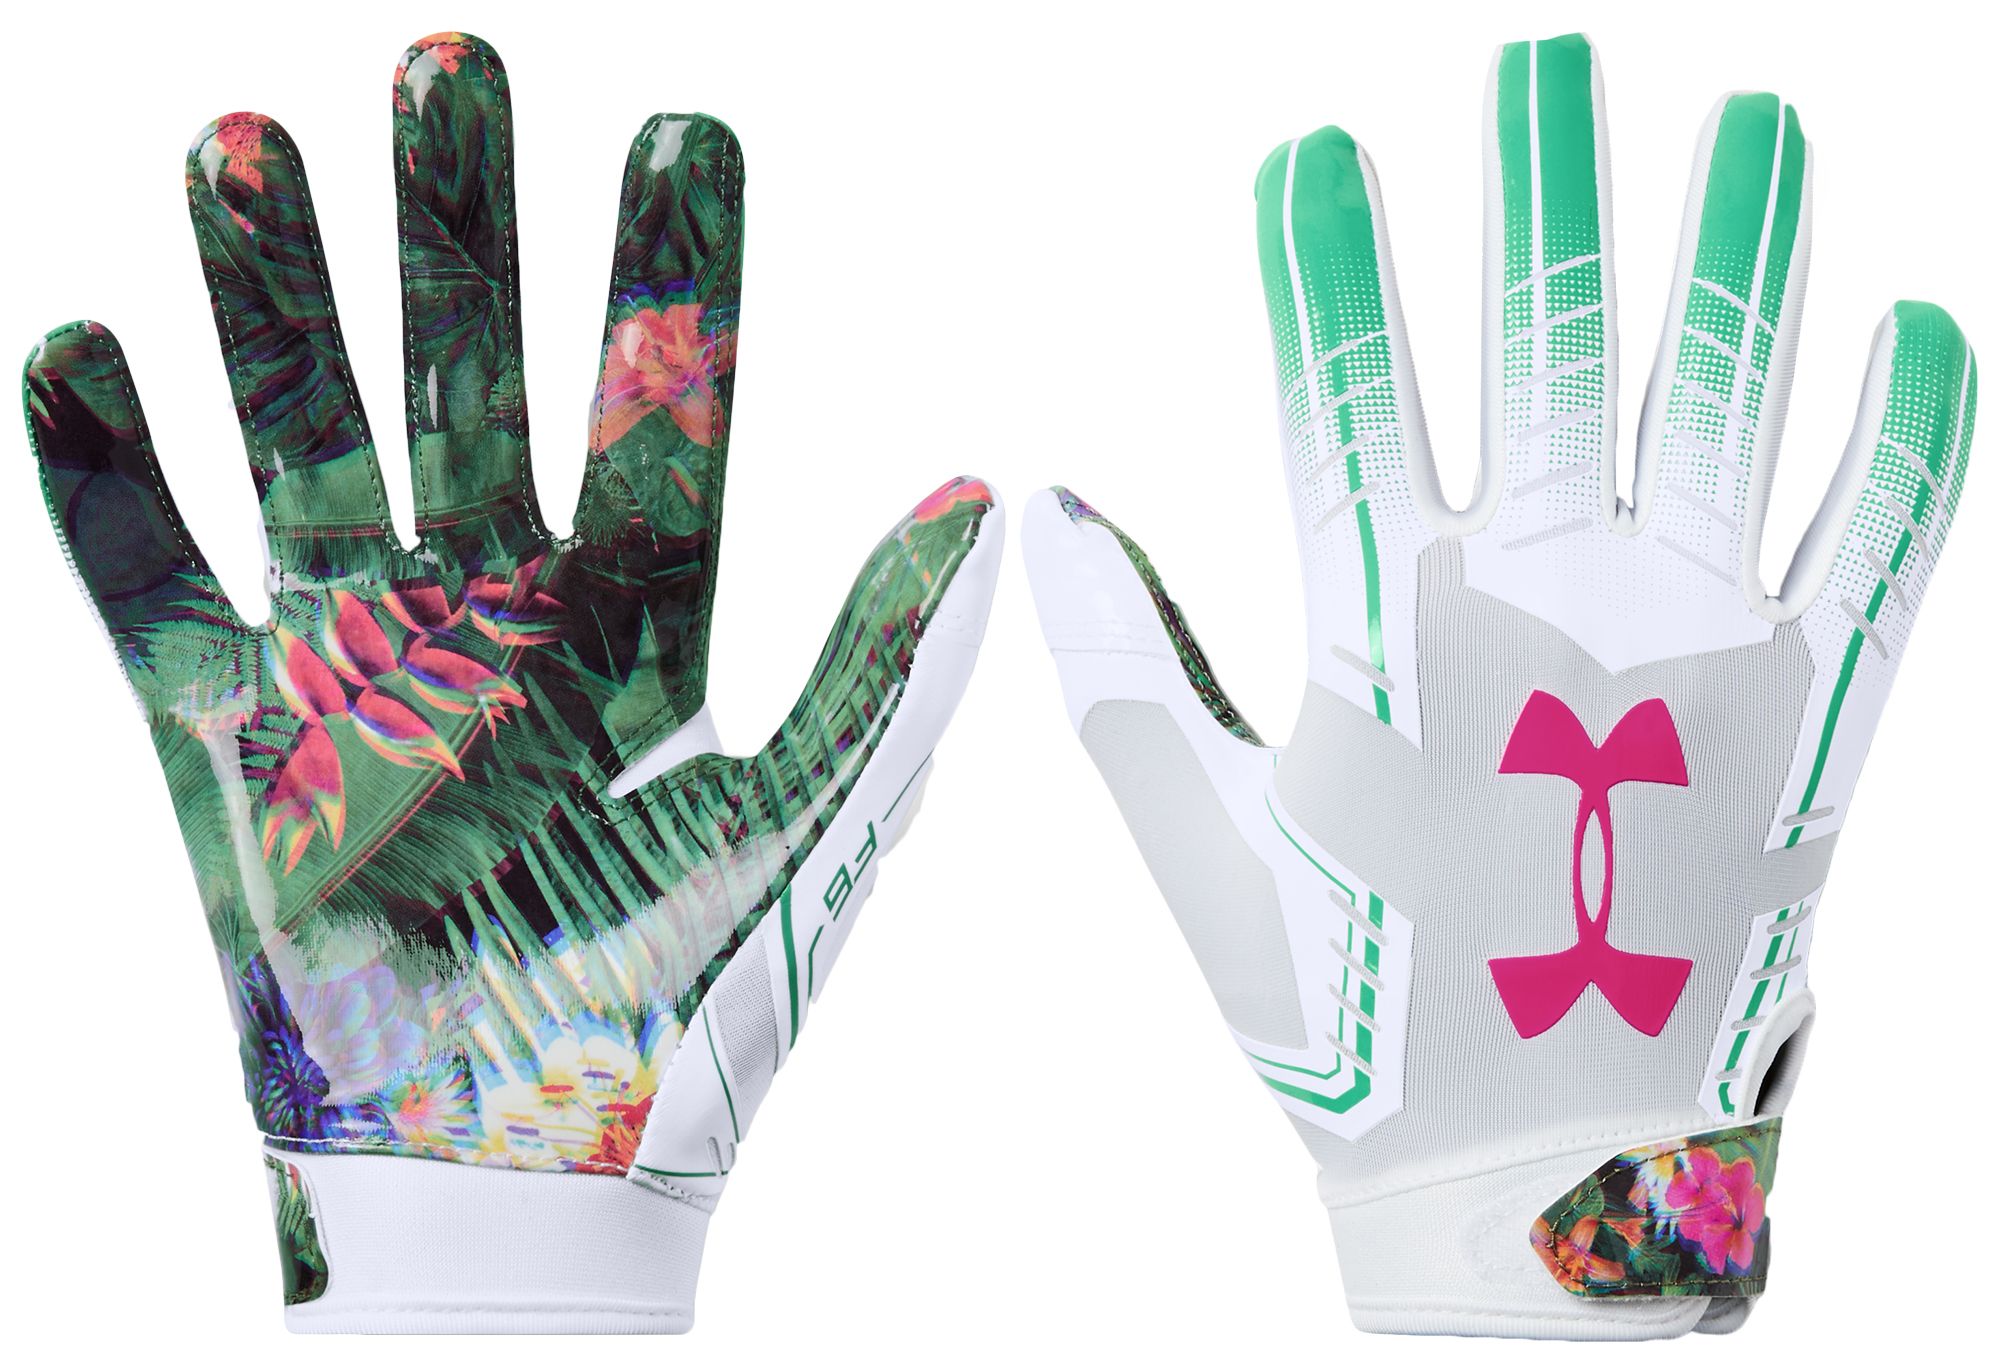 under armour youth f6 limited edition football receiver gloves